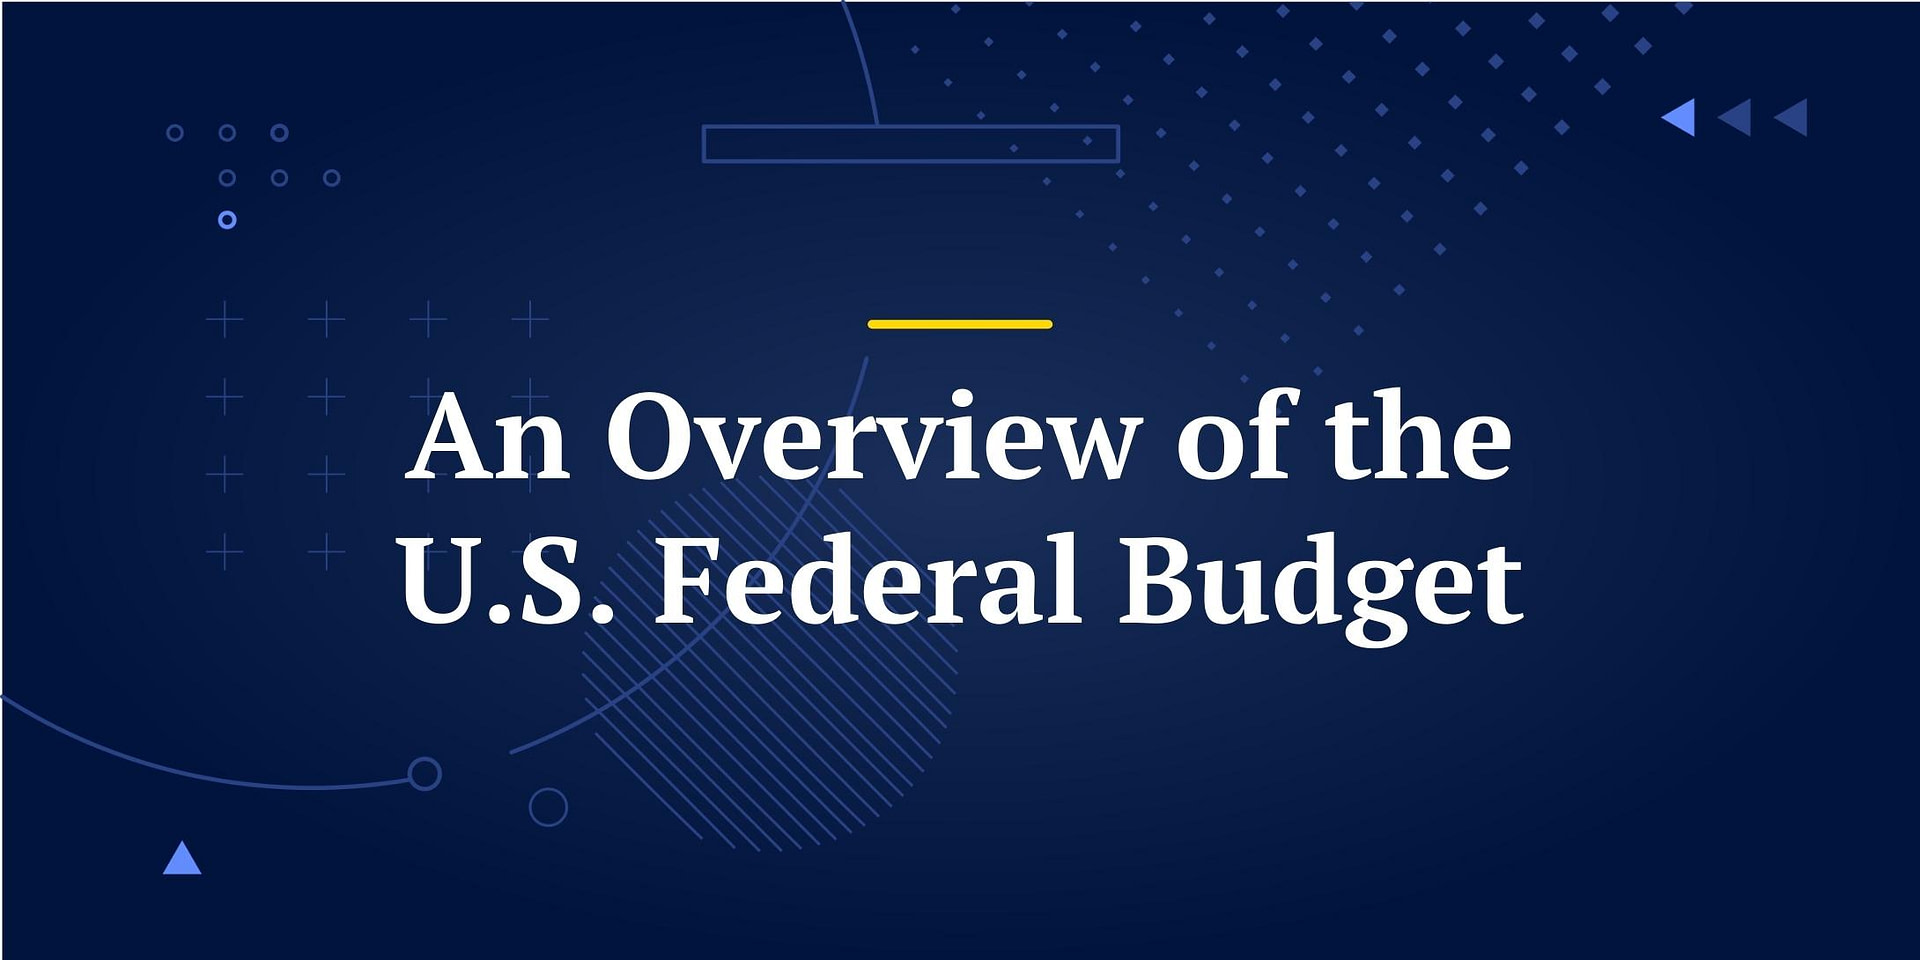 An Overview of the U.S. Federal Budget